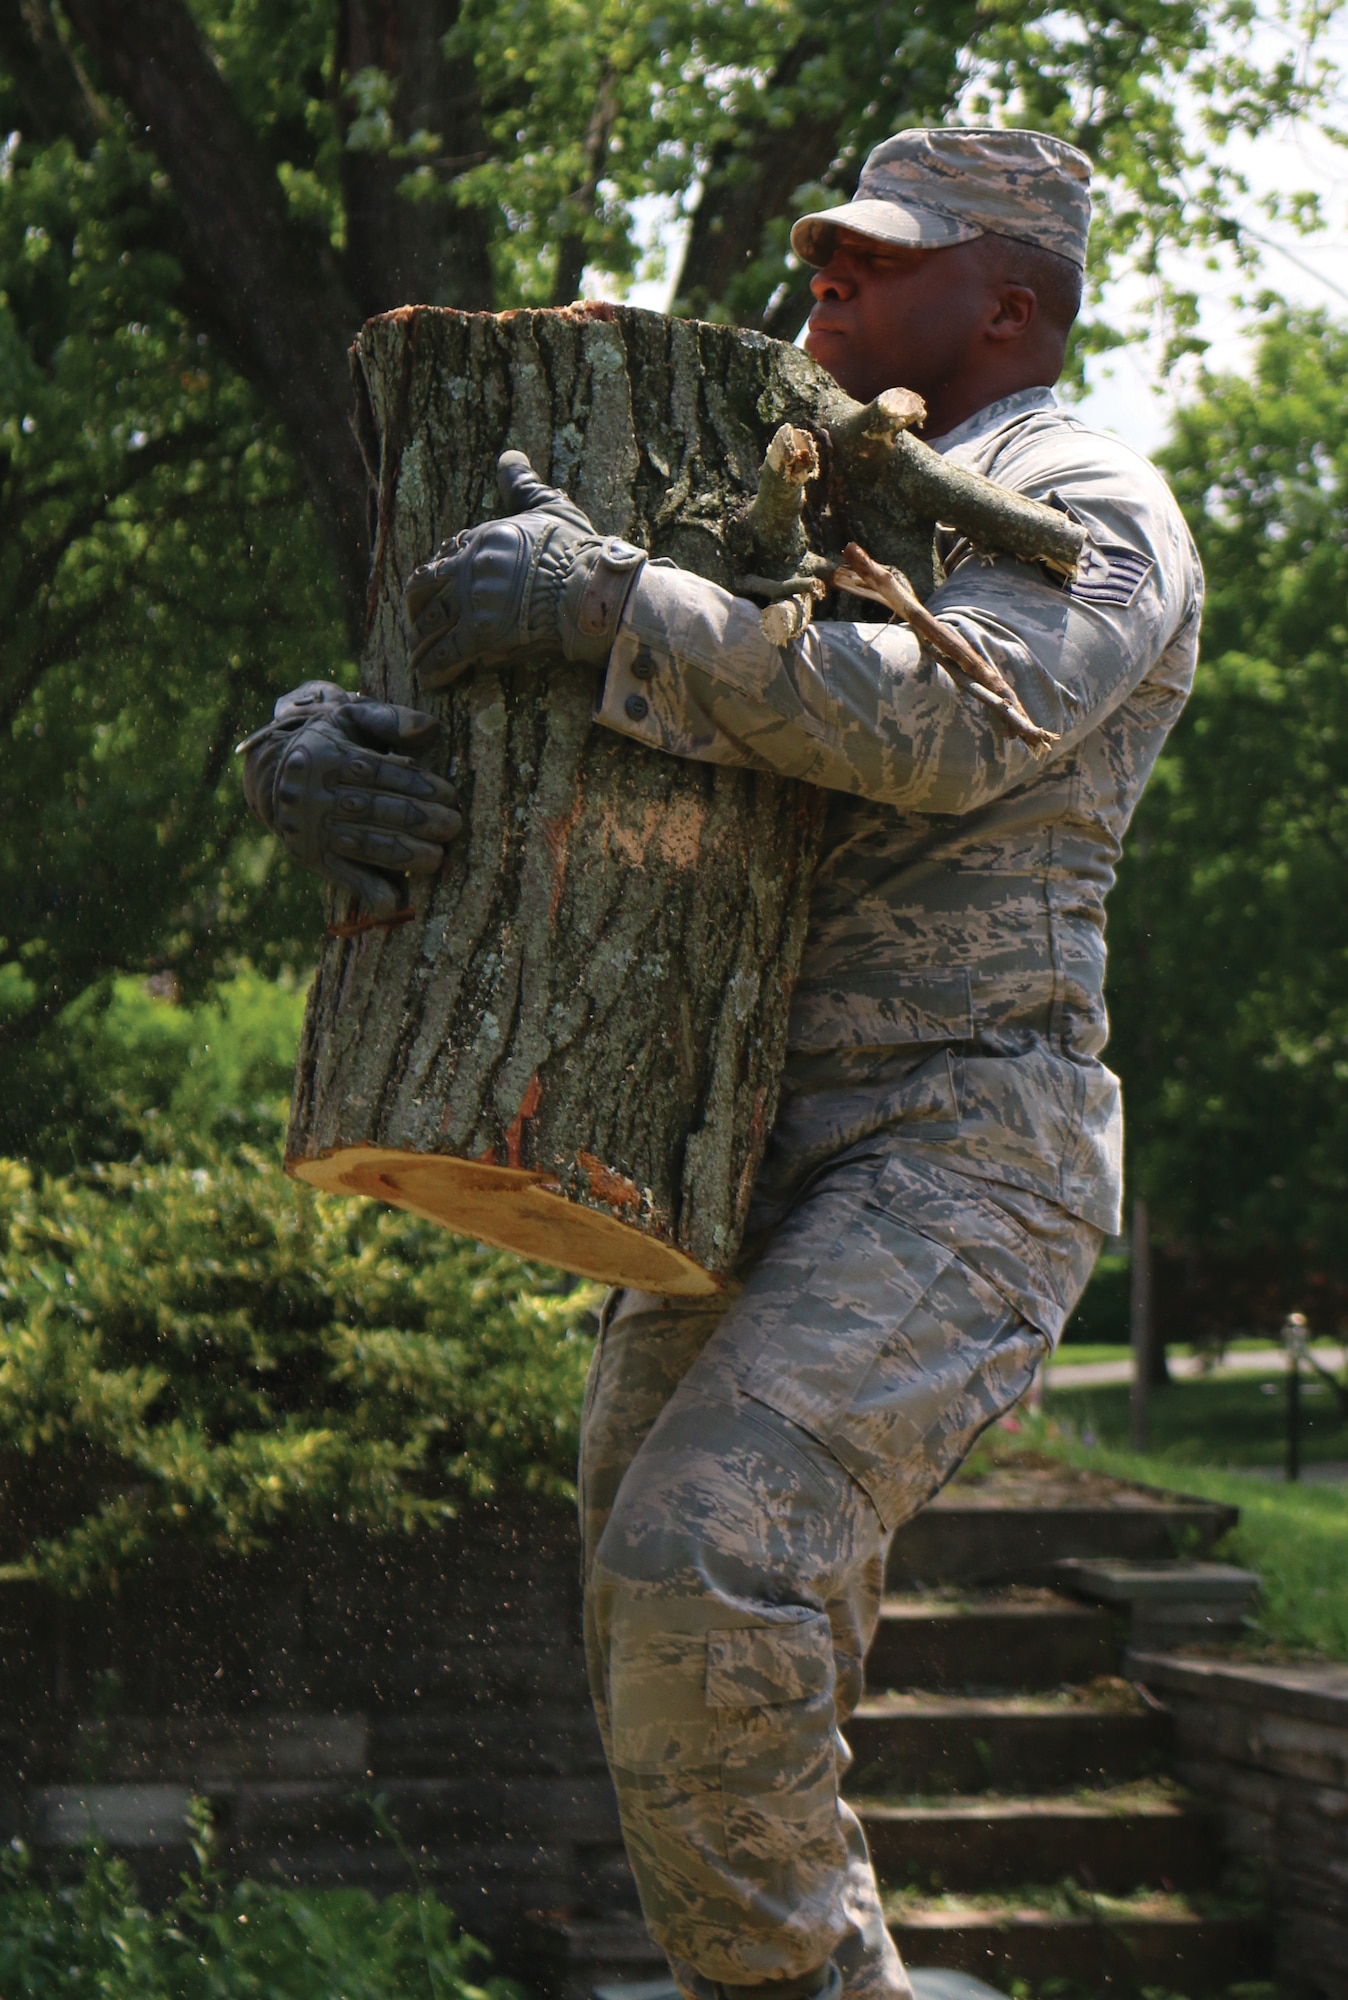 Tech. Sgt. Jason Thomas, 445th Aerospace Medicine Squadron medical technician, carries part of a tree that was cut into pieces as part of the tornado cleanup effort June 1, 2019. Nine Airmen from the 445th AMDS were helping one of their own who’s home was heavily damaged after several tornadoes hit the Miami Valley area May 27, 2019